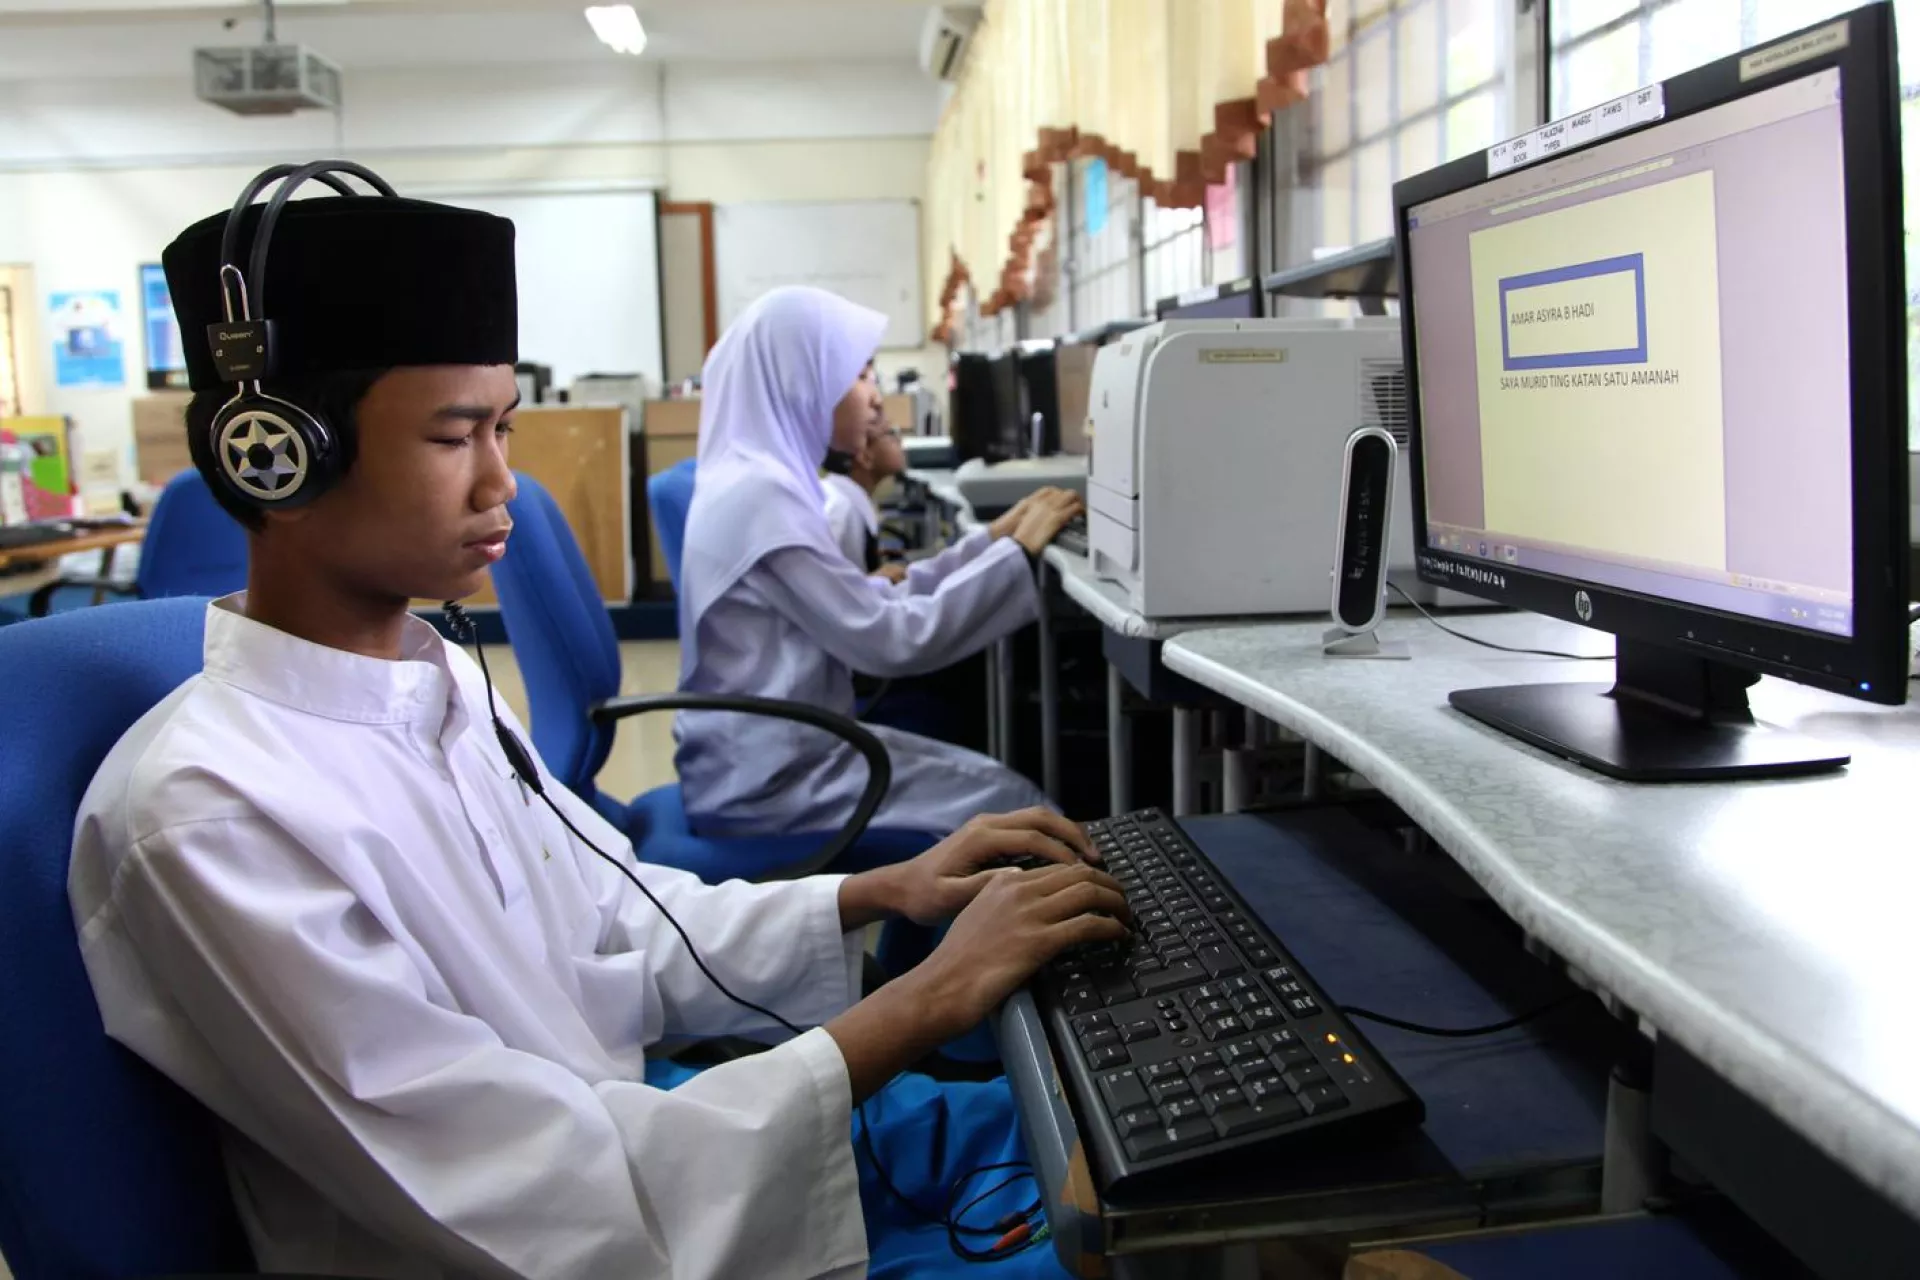 In Malaysia, an adolescent boy who is blind uses a computer with text-to-speech